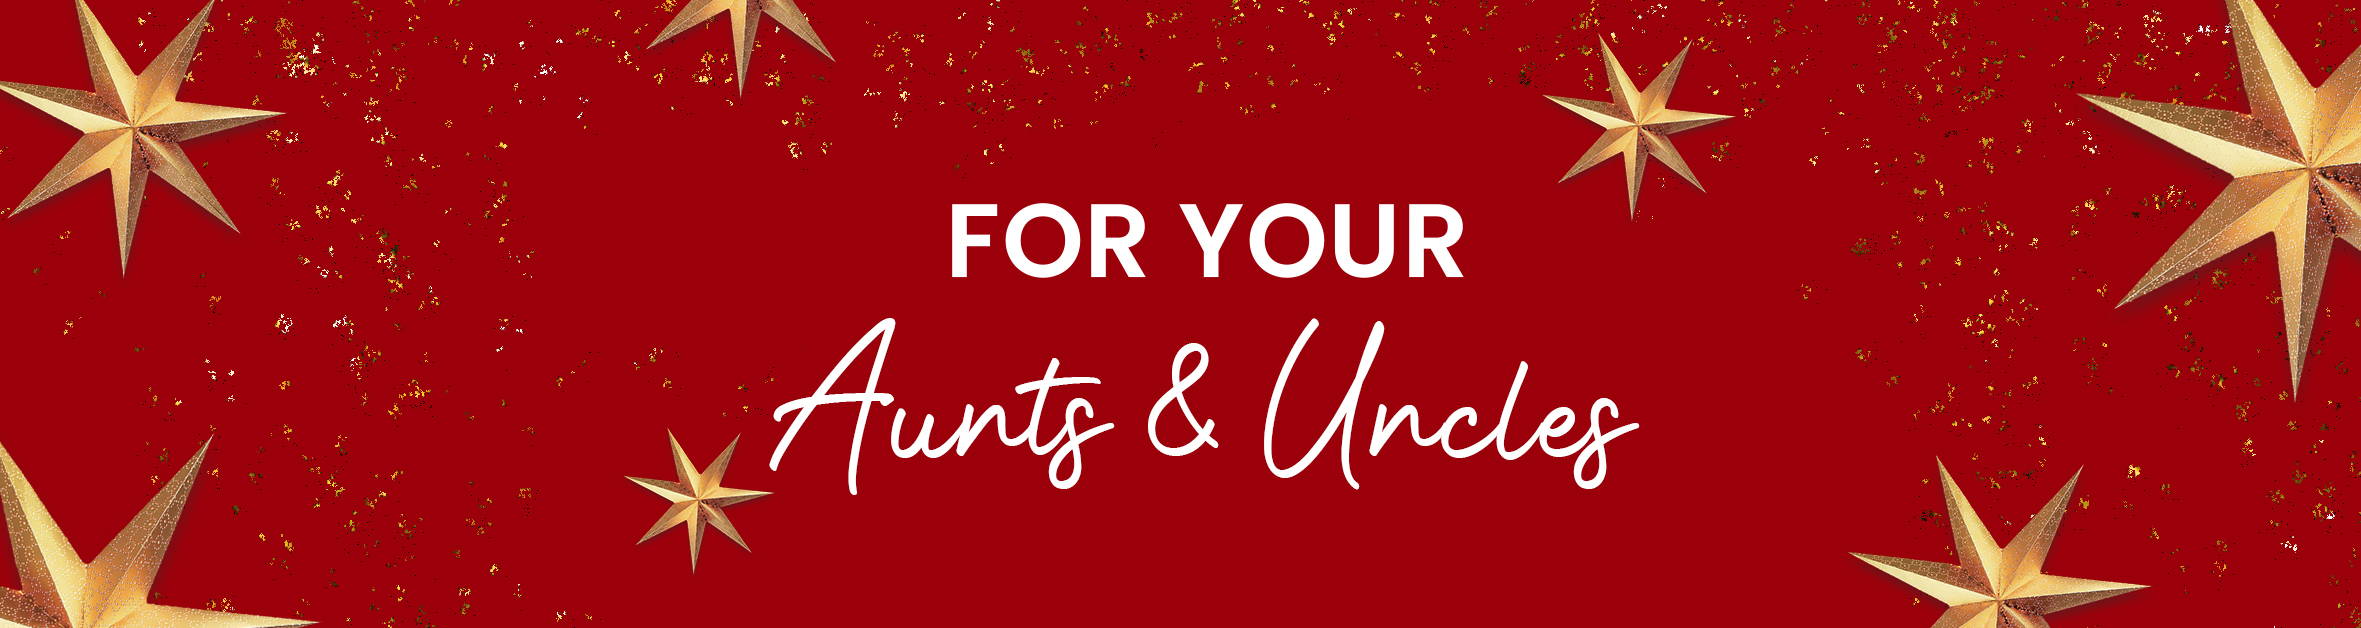 Holiday Gifts For Aunts & Uncles